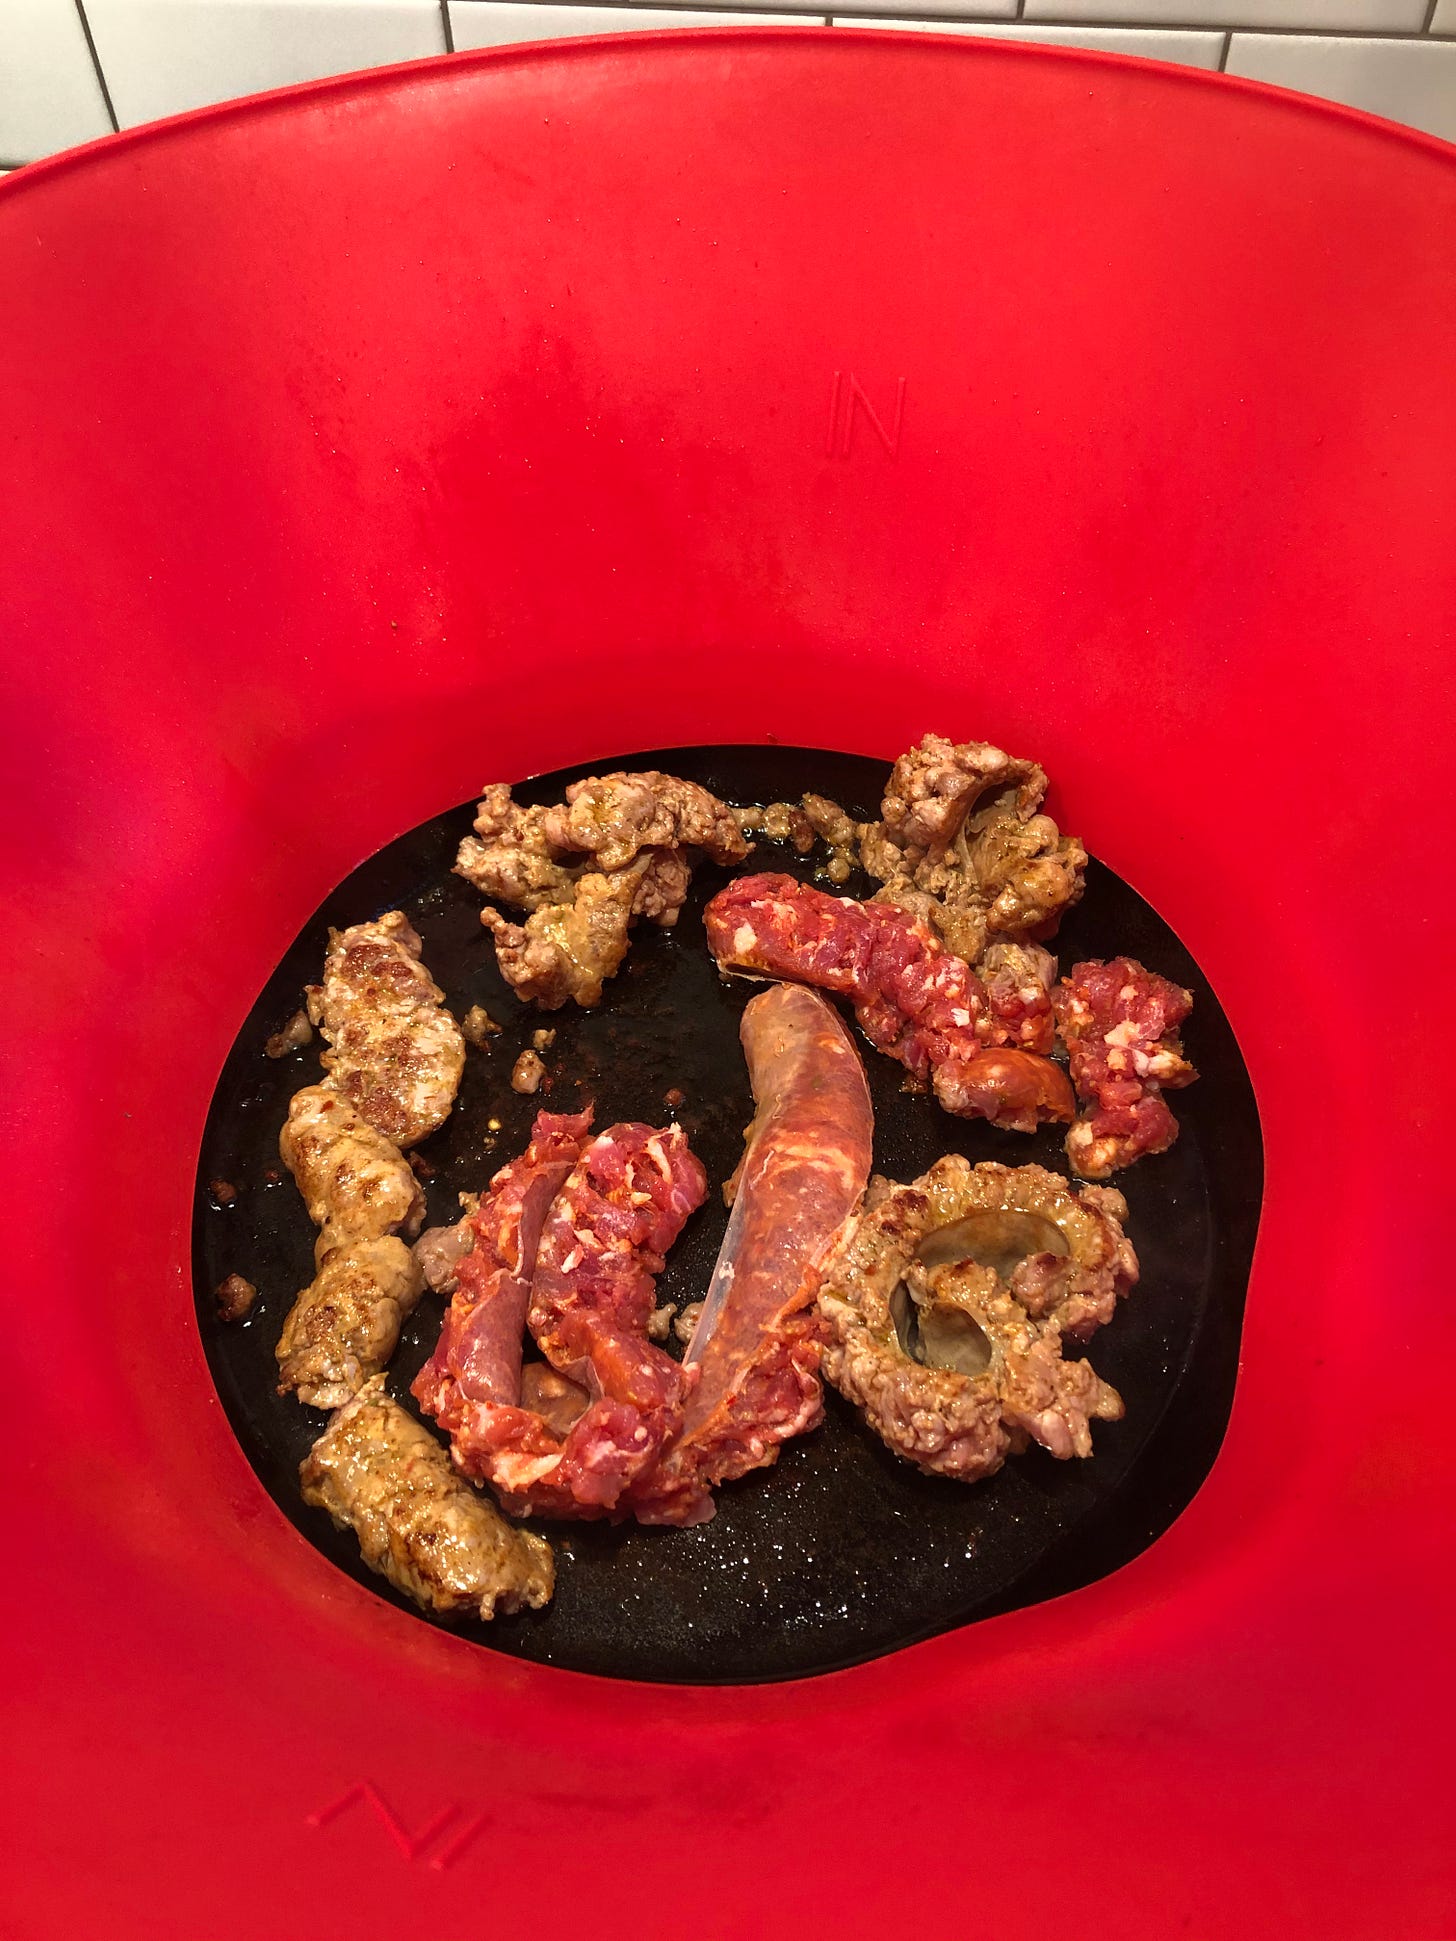 Sausages browning in a skillet, surrounded by a red silicone ring.